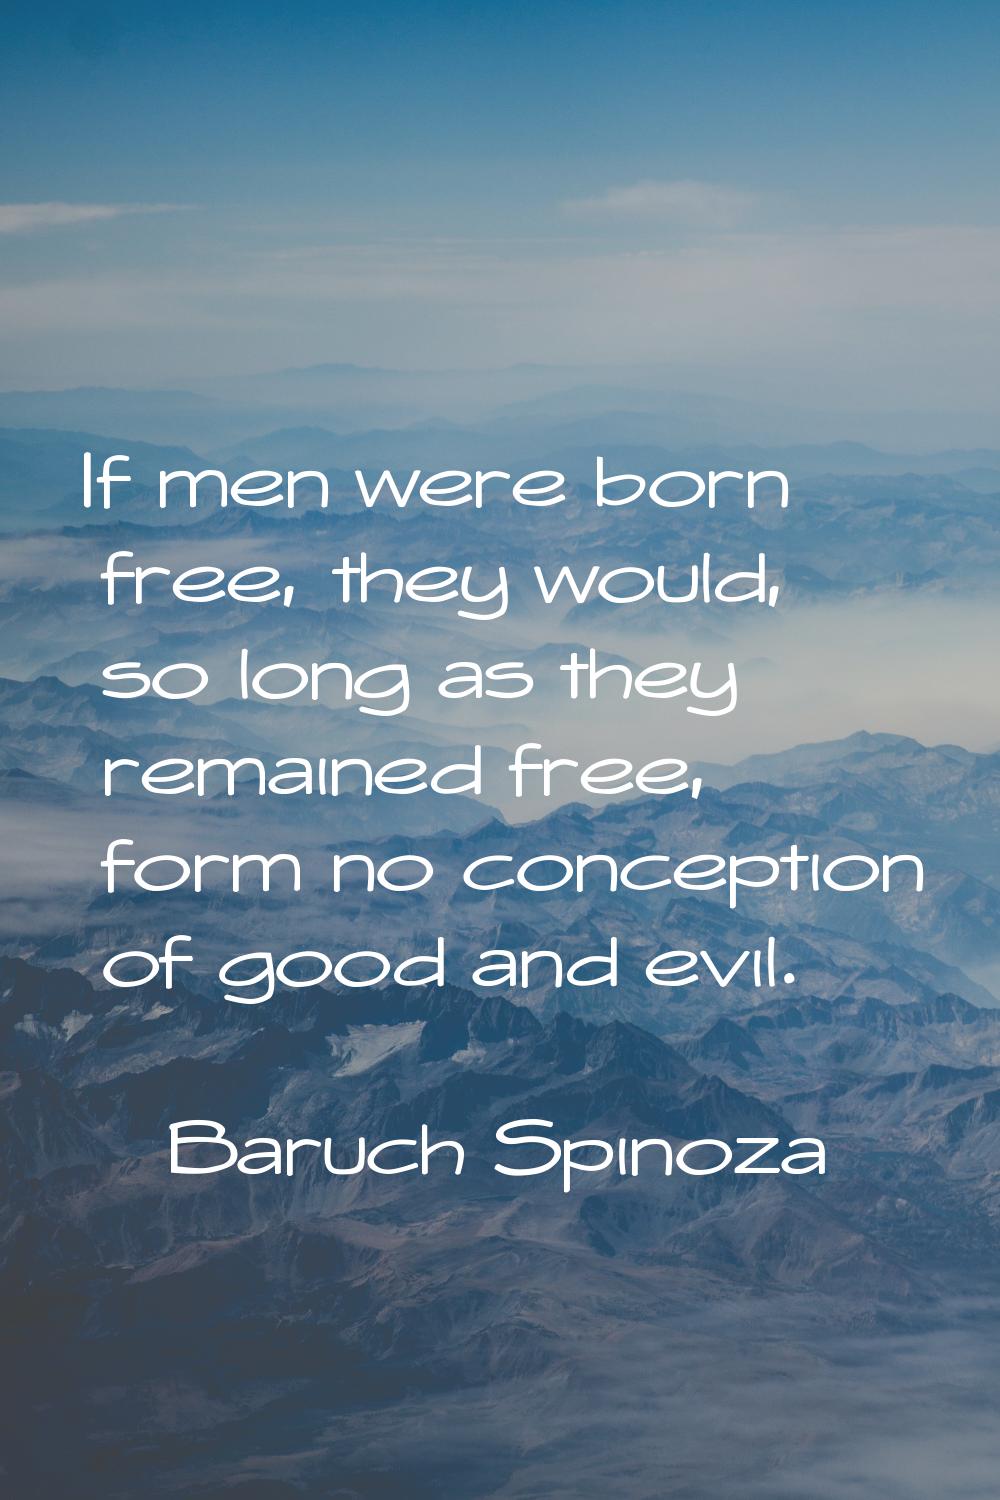 If men were born free, they would, so long as they remained free, form no conception of good and ev